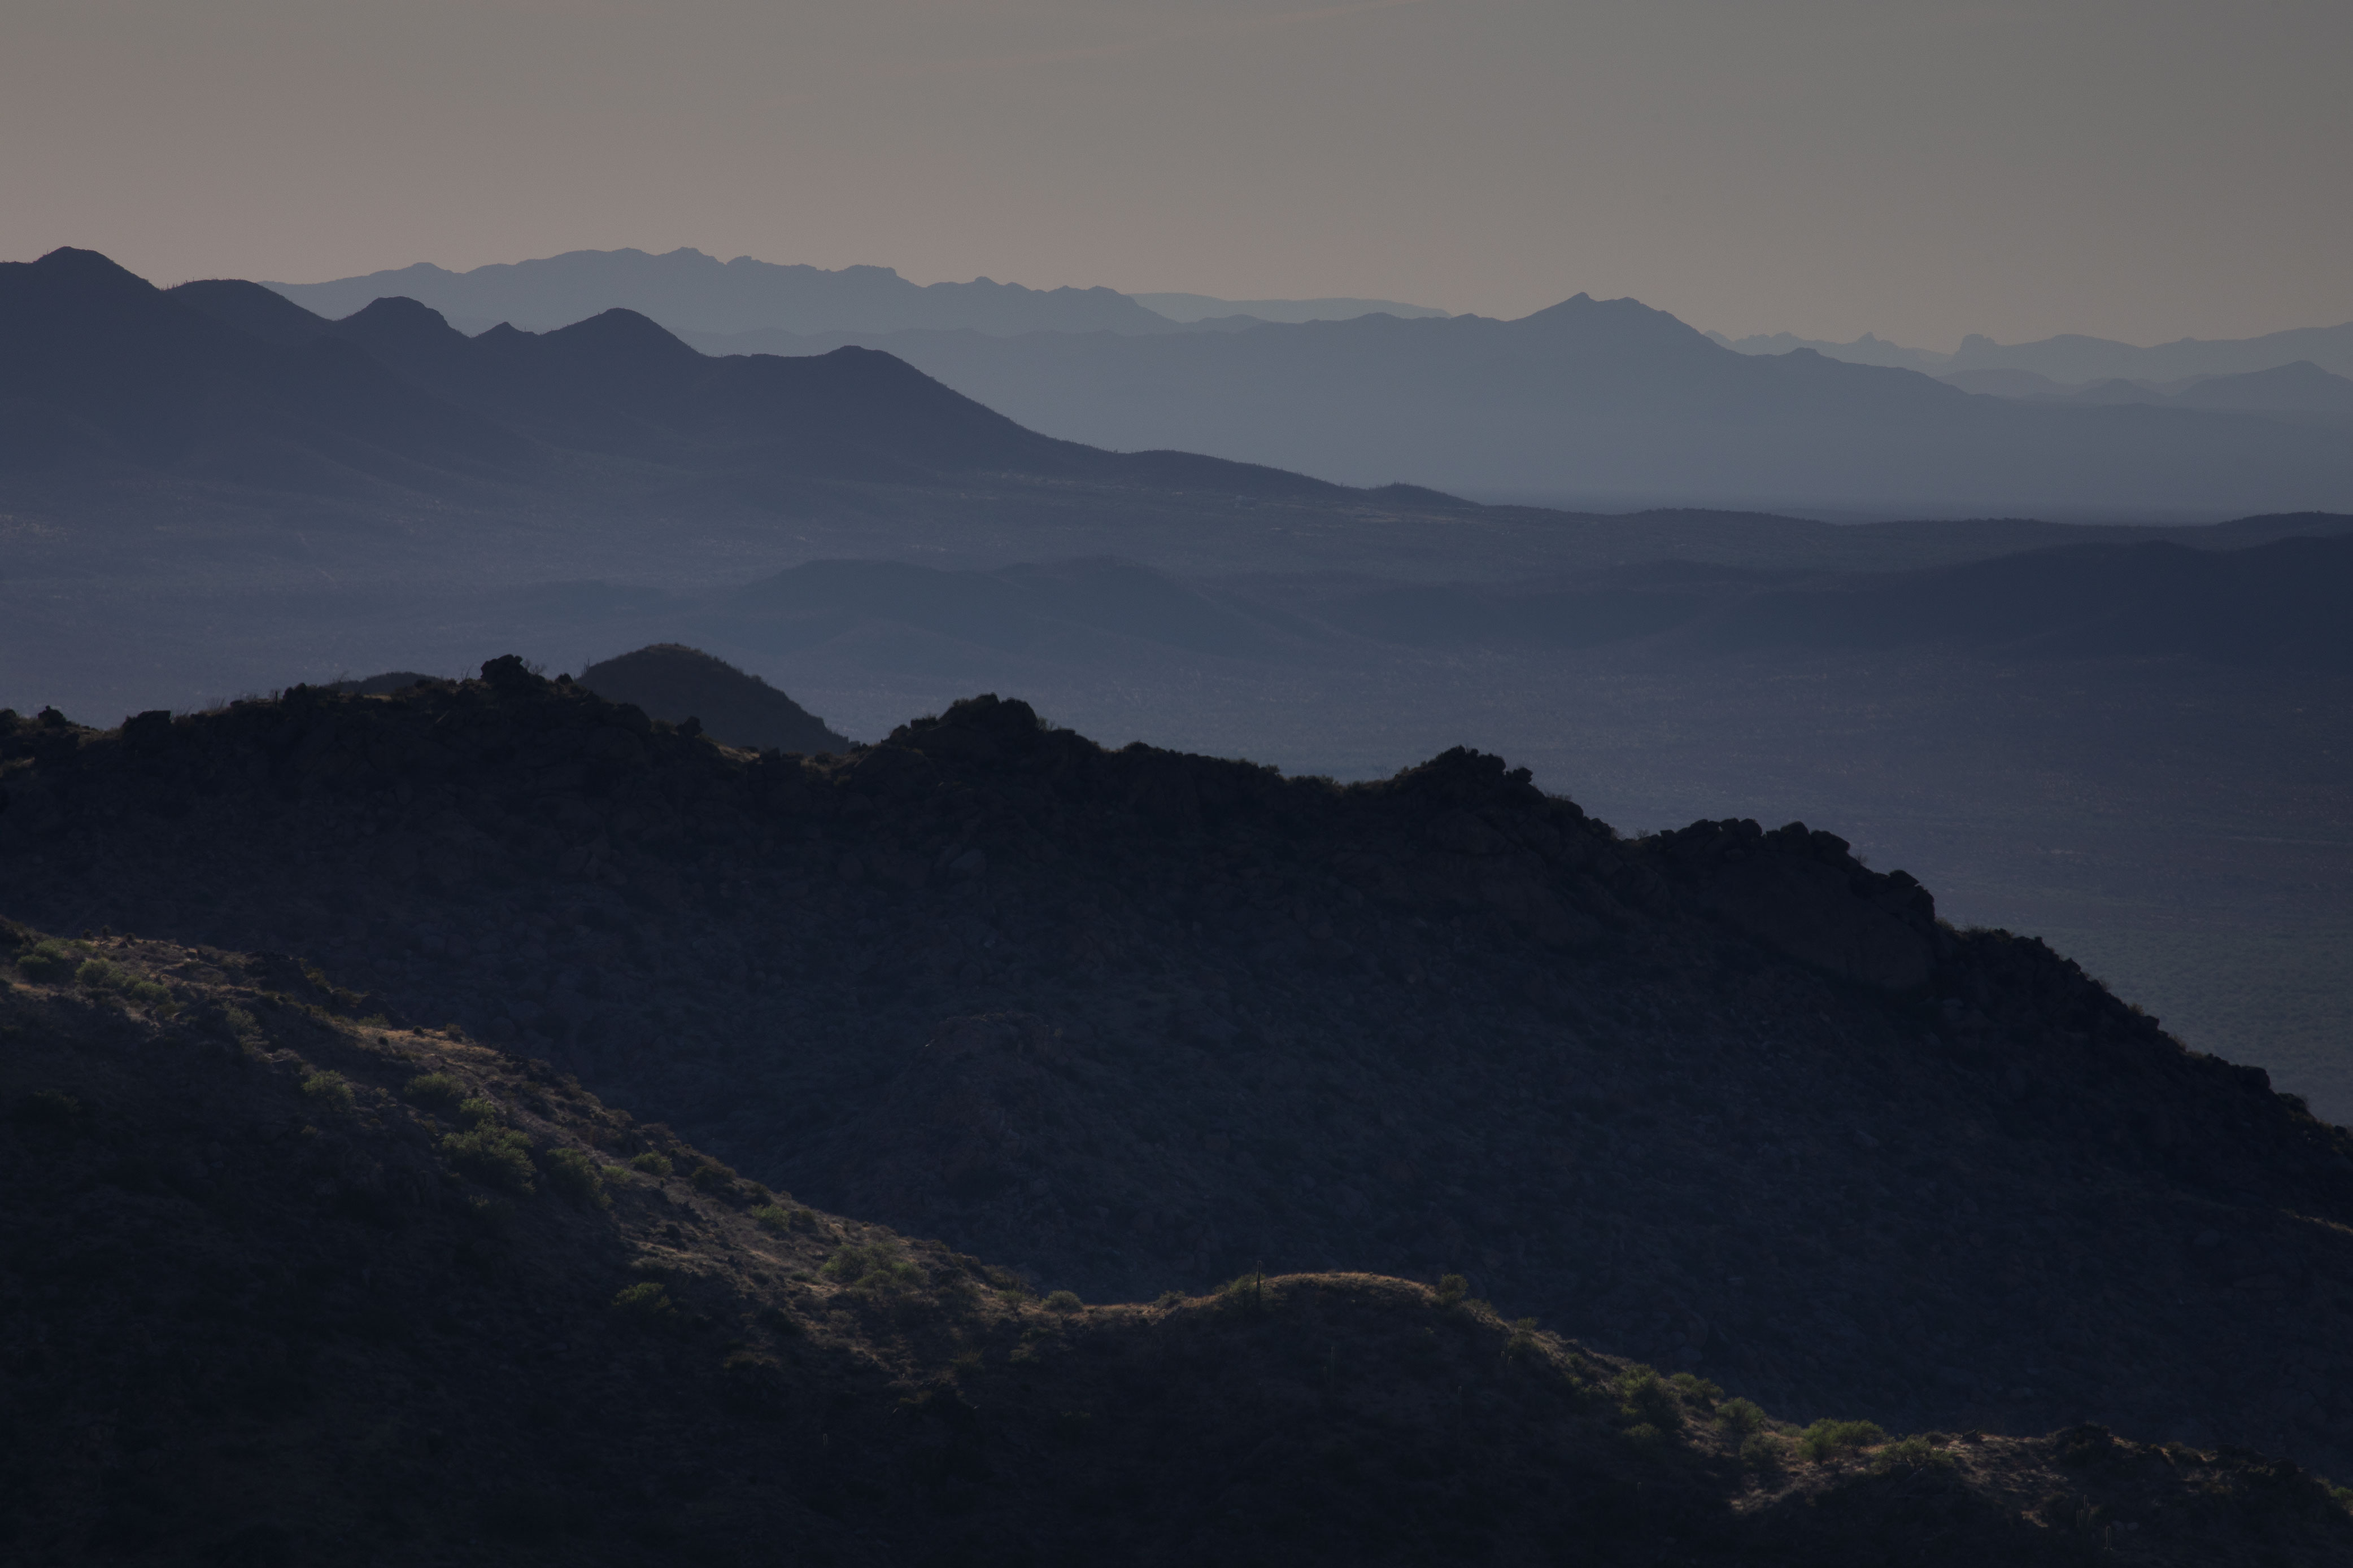 From the Quinlan Mts. looking west toward other southern Arizona ranges including the Combobi and Quijotoa Mts.
